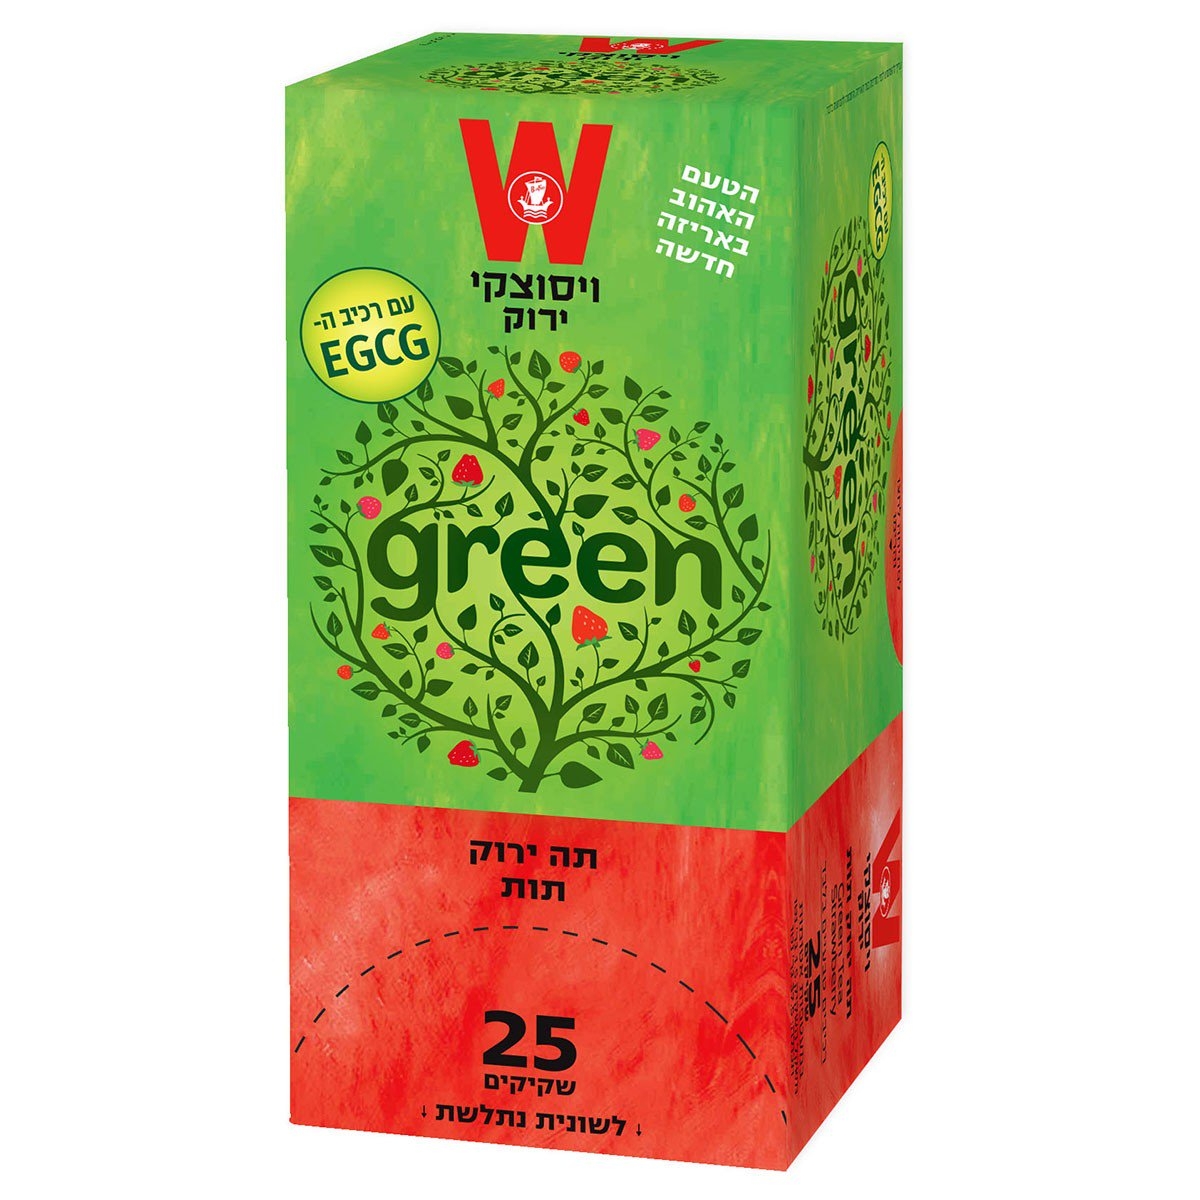 Green Tea with Strawberries From Wissotzky - 1